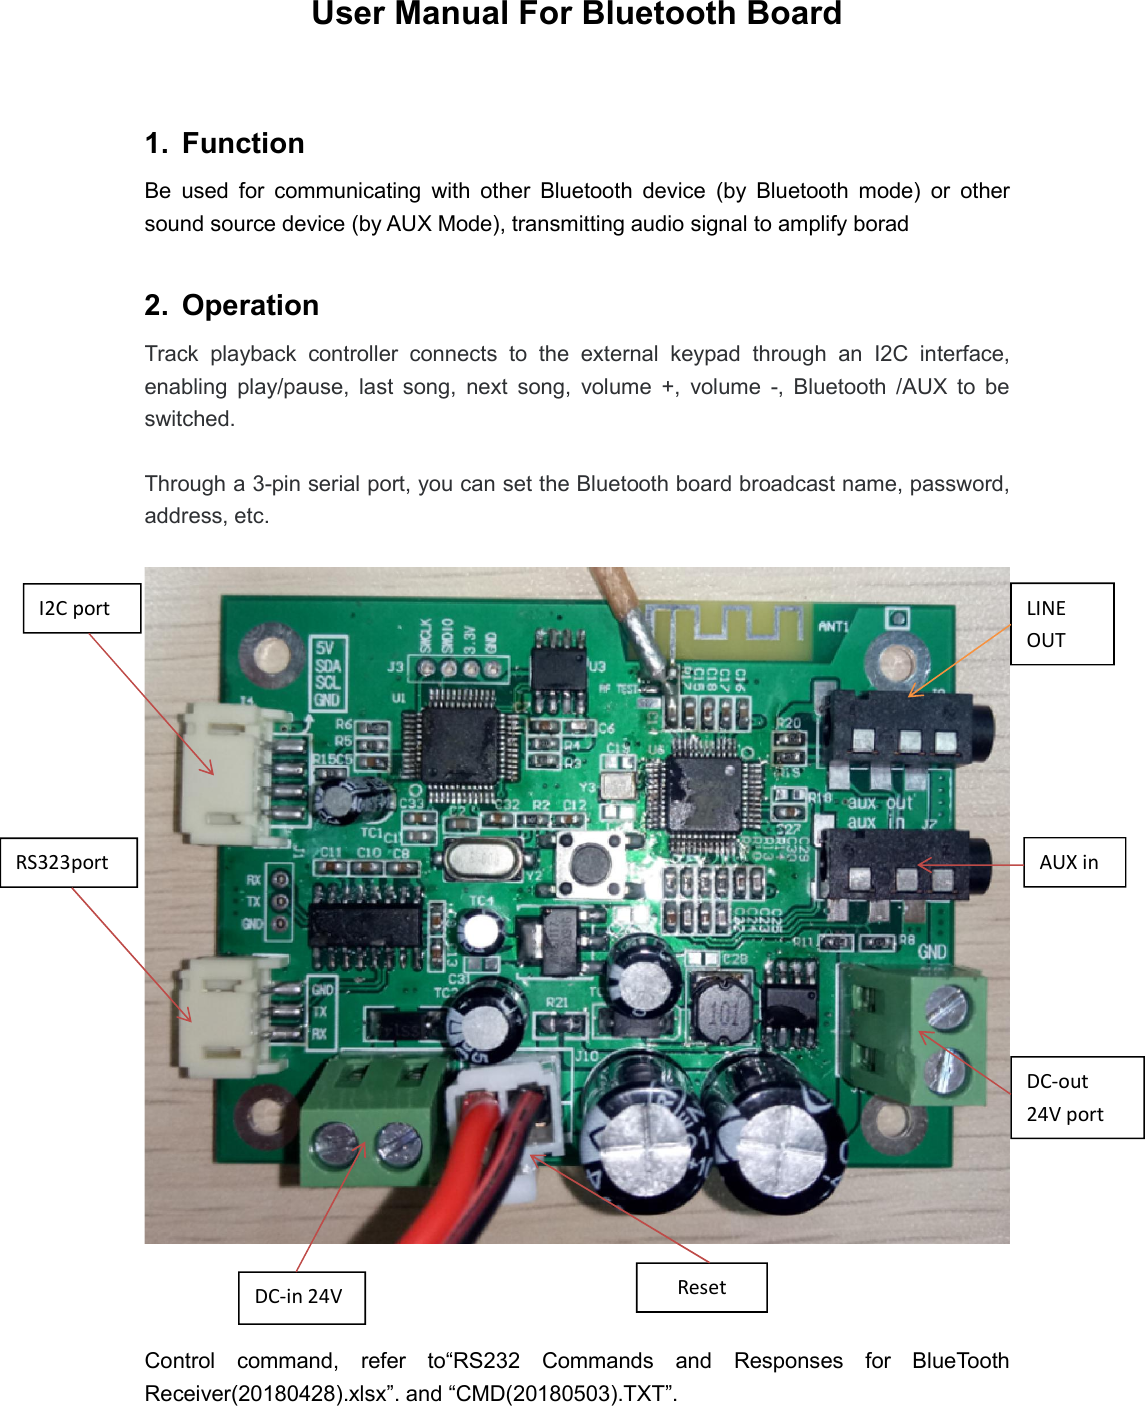 User Manual For Bluetooth Board  1.  Function   Be  used  for  communicating  with  other  Bluetooth  device  (by  Bluetooth  mode)  or  other sound source device (by AUX Mode), transmitting audio signal to amplify borad  2.  Operation Track  playback  controller  connects  to  the  external  keypad  through  an  I2C  interface, enabling  play/pause,  last  song,  next  song,  volume  +,  volume  -,  Bluetooth  /AUX  to  be switched.  Through a 3-pin serial port, you can set the Bluetooth board broadcast name, password, address, etc.        Control  command,  refer  to“RS232  Commands  and  Responses  for  BlueTooth Receiver(20180428).xlsx”. and “CMD(20180503).TXT”. LINE OUT AUX in DC-in 24V DC-out 24V port I2C port  RS323port Reset 